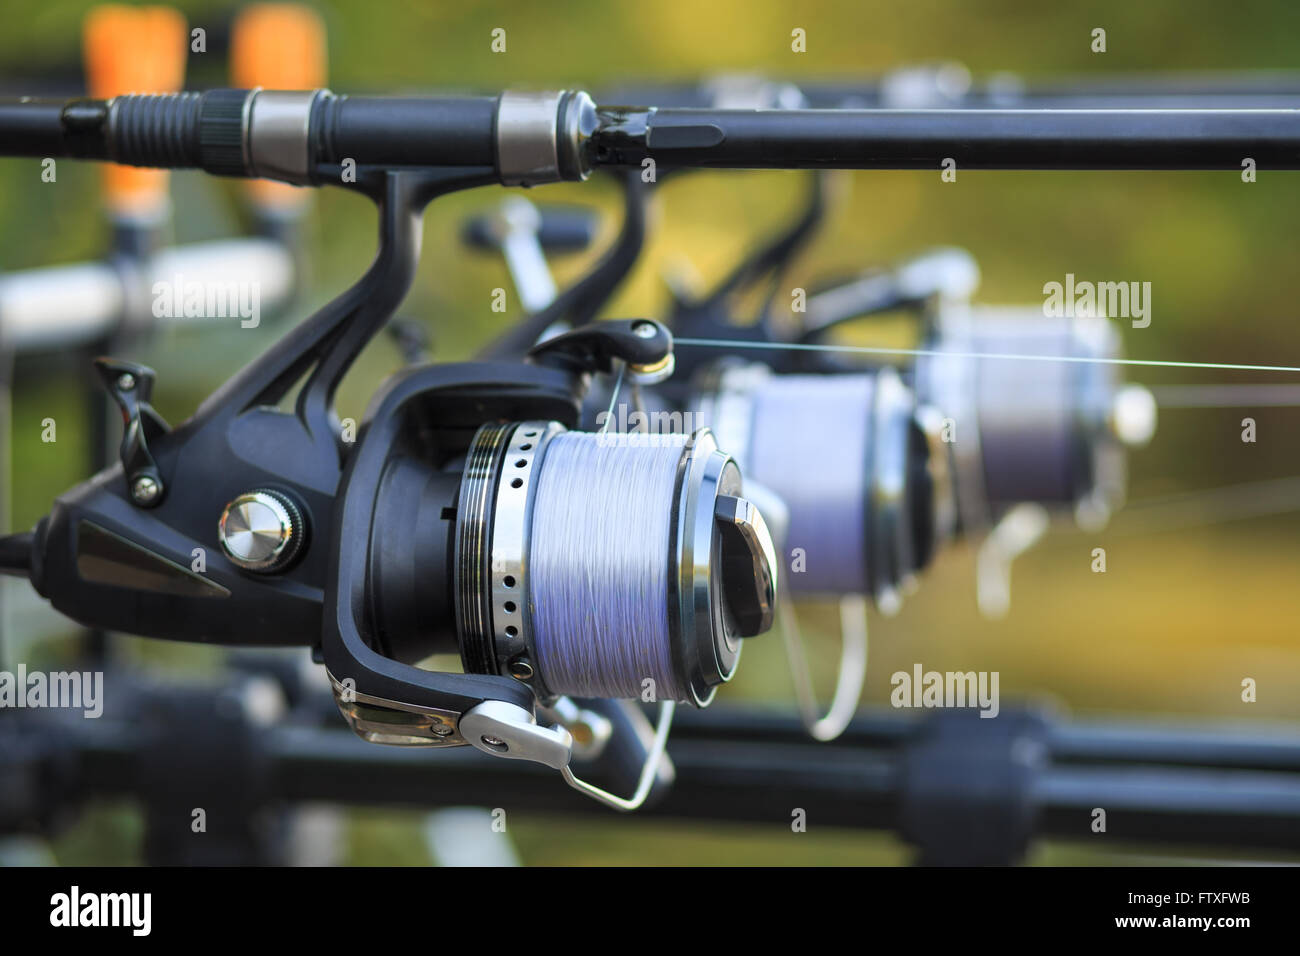 Three fishing rods with professional reel set up on support. Stock Photo